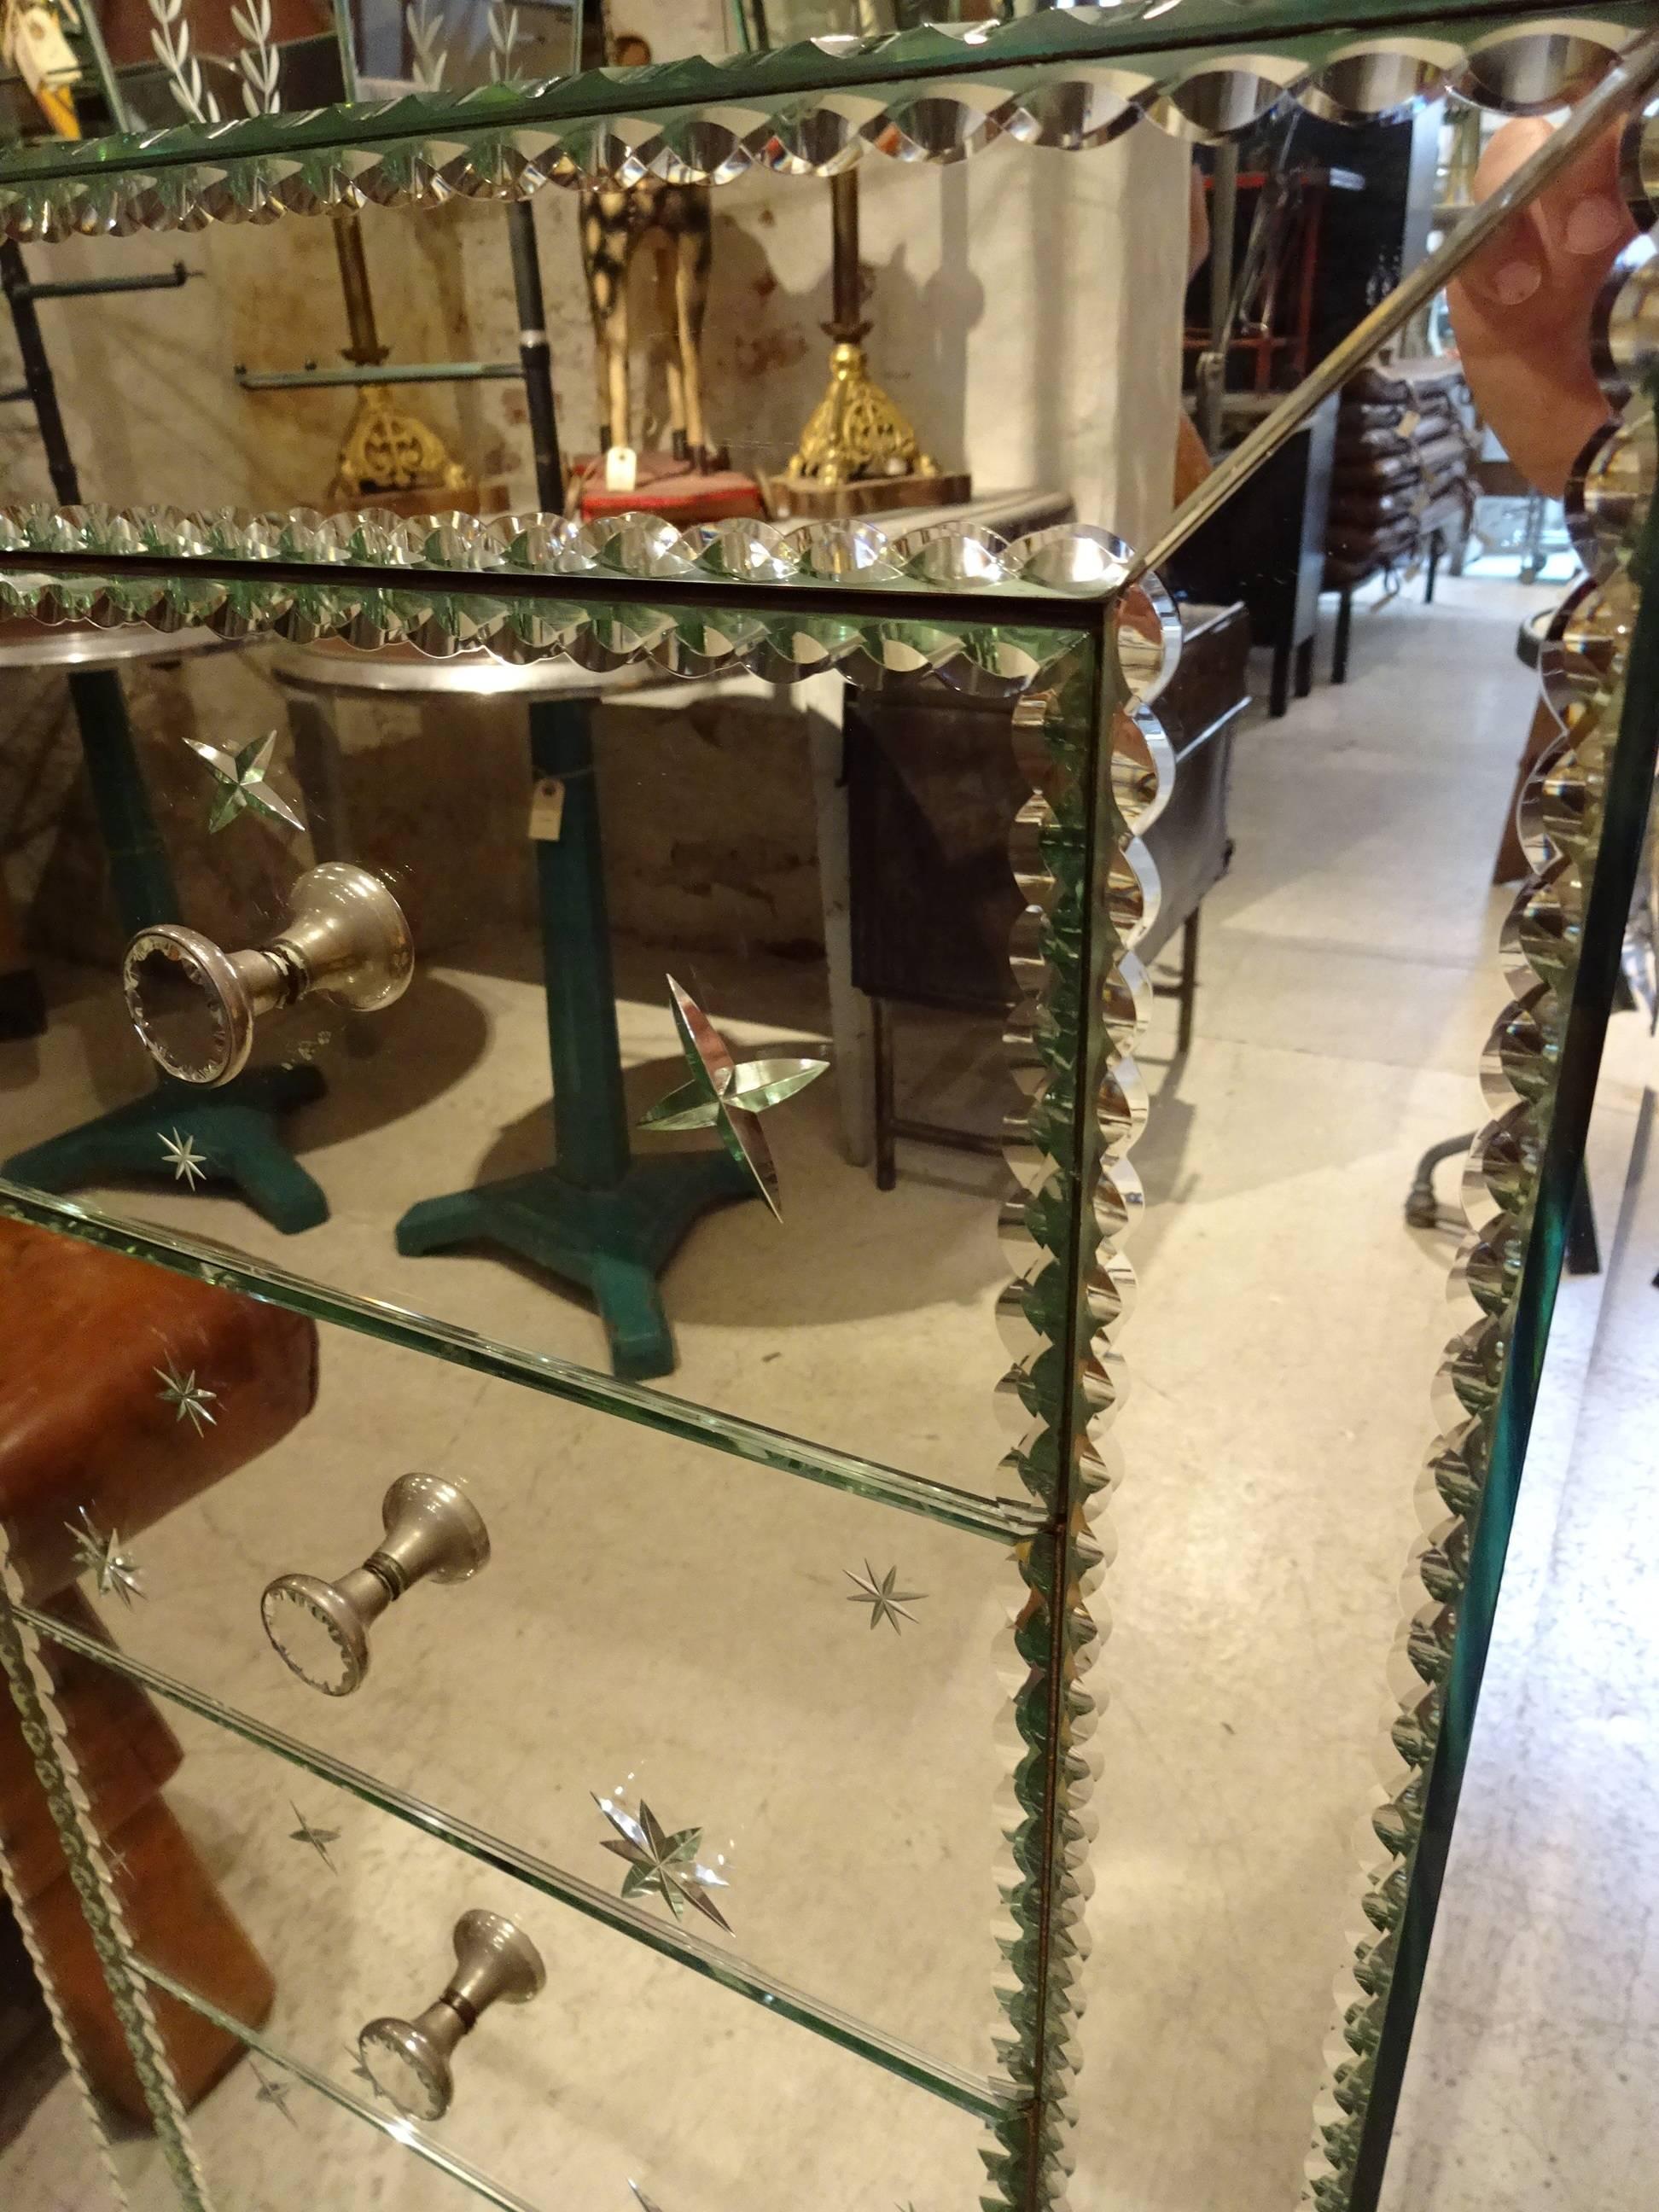 Great French dresser, completely covered in mirrored glass. The dresser has five drawers, each with an elegant cut-glass knob as a handle. The dresser is in very good condition.

